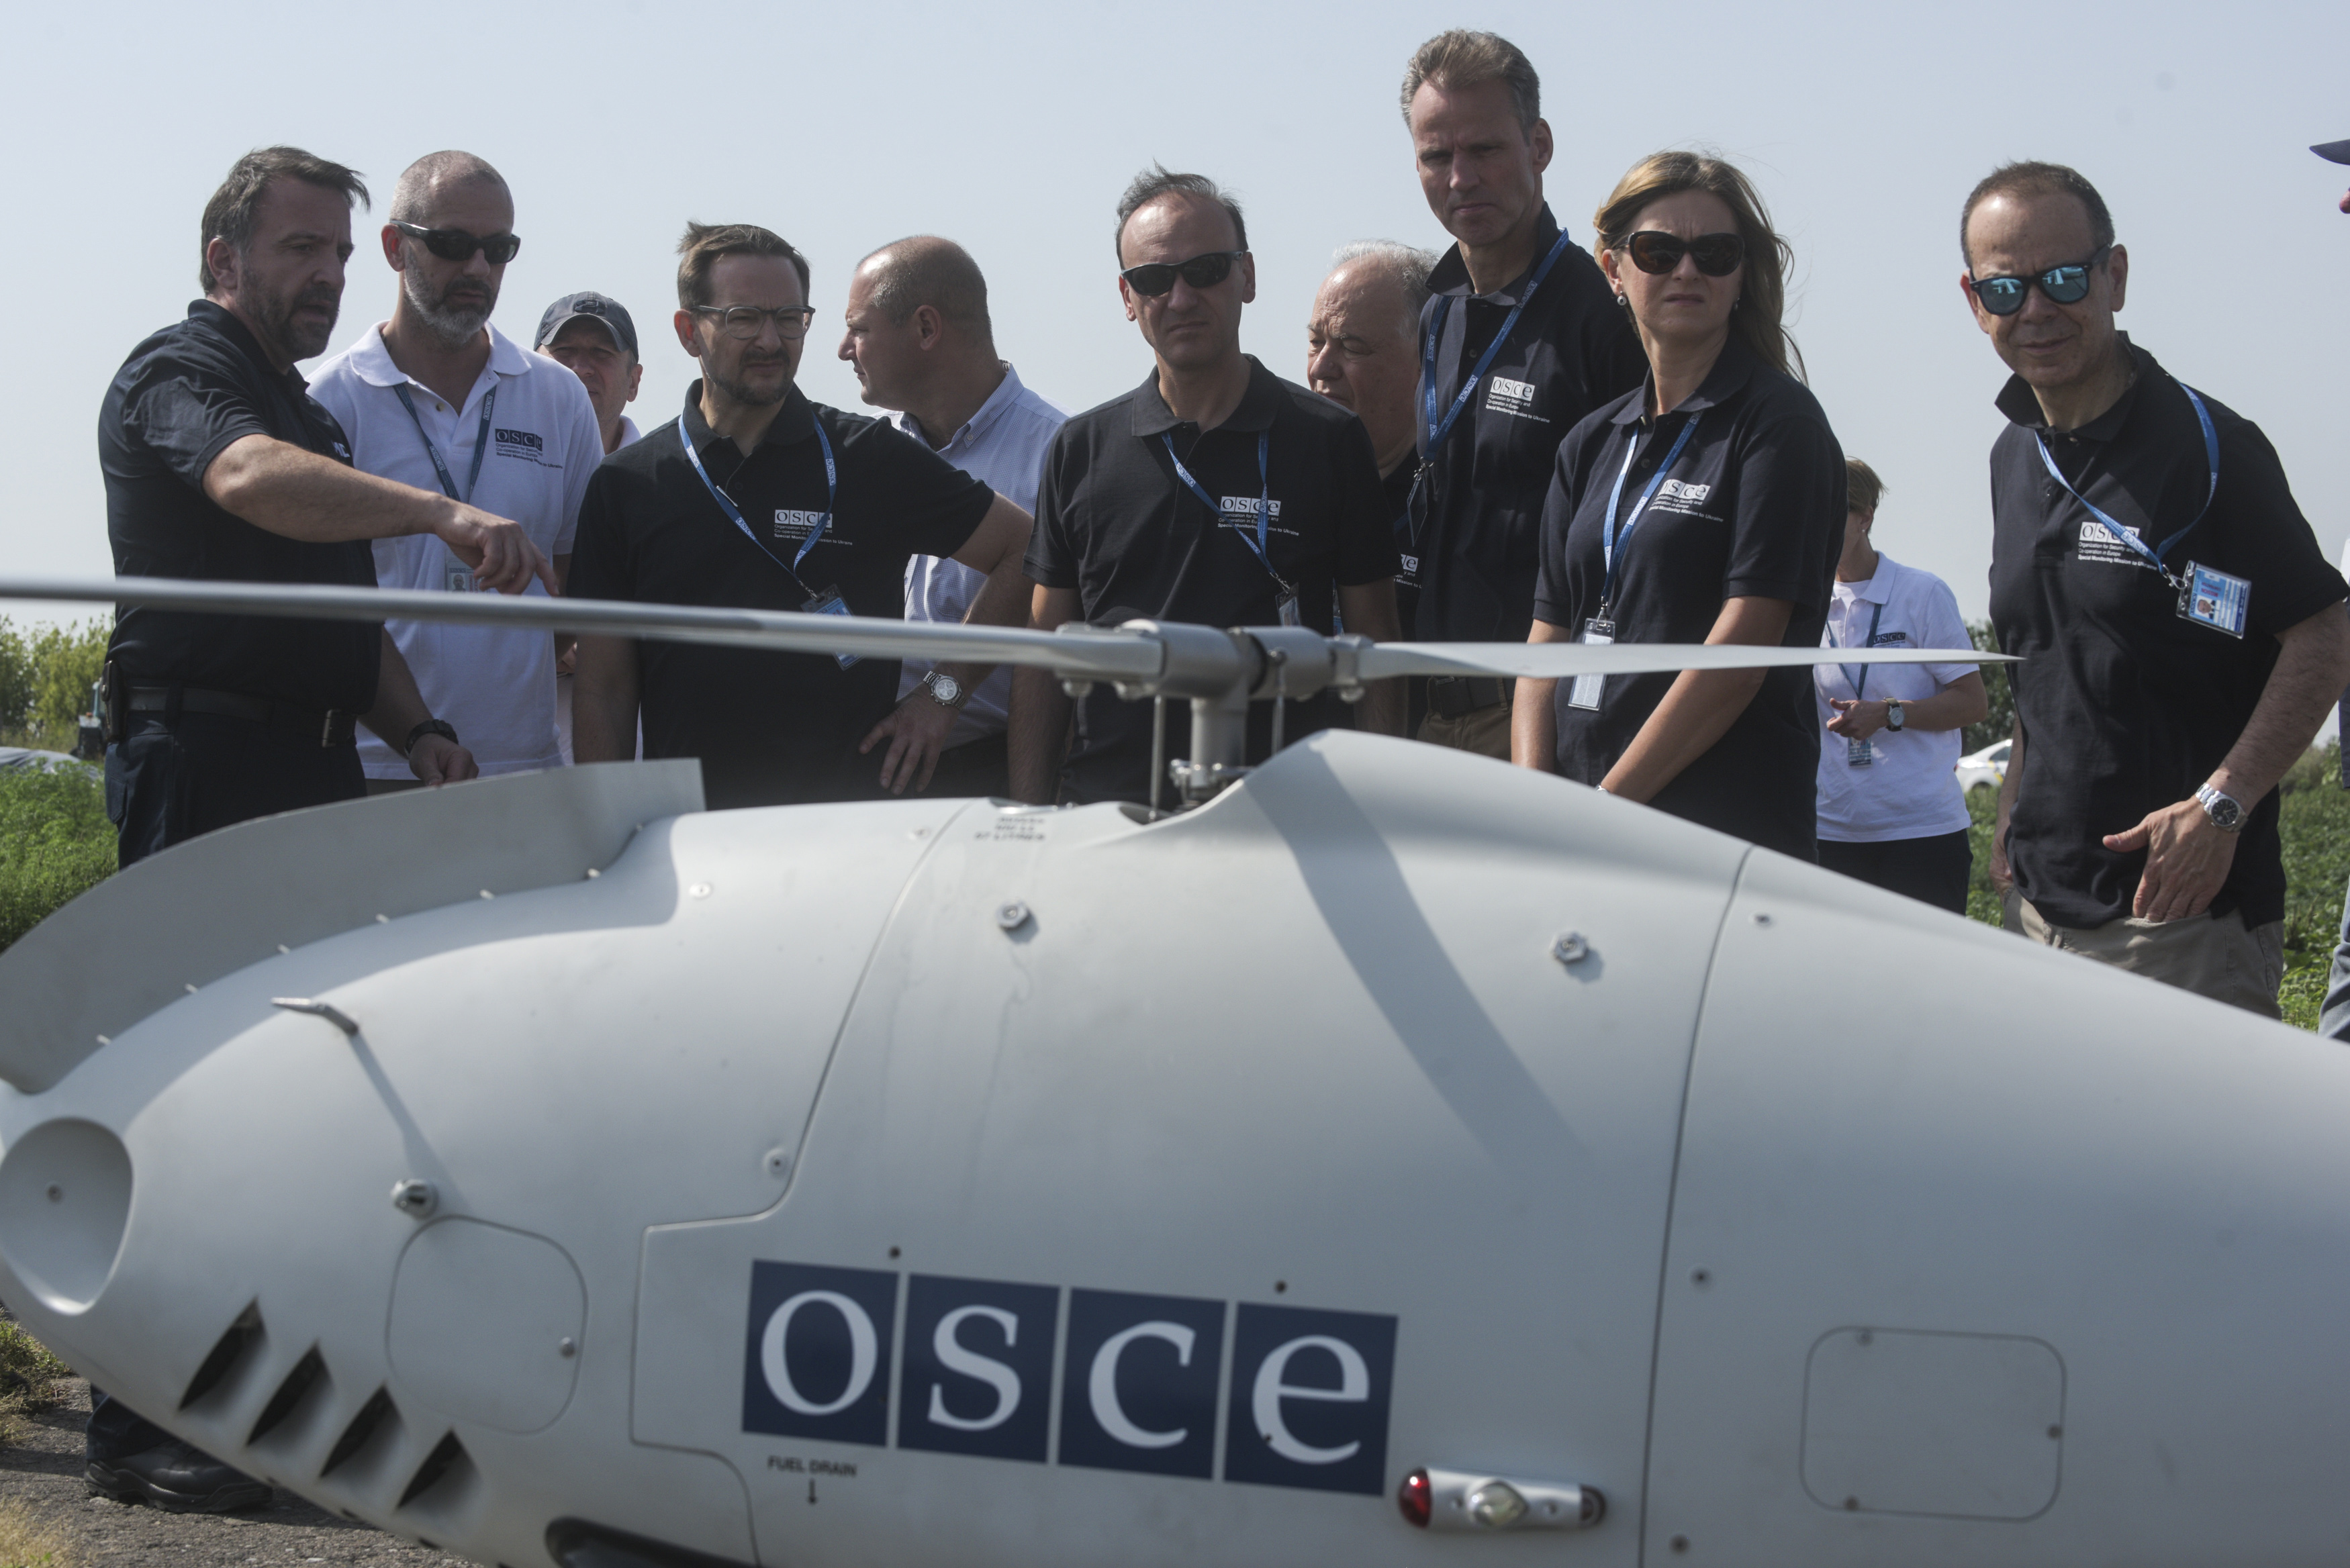 Members of the Special Monitoring Mission present a long-range Unmanned aerial vehicle (UAV) to OSCE Secretary General Thomas Greminger during his visit in eastern Ukraine, Stepanivka, 27 July 2018.